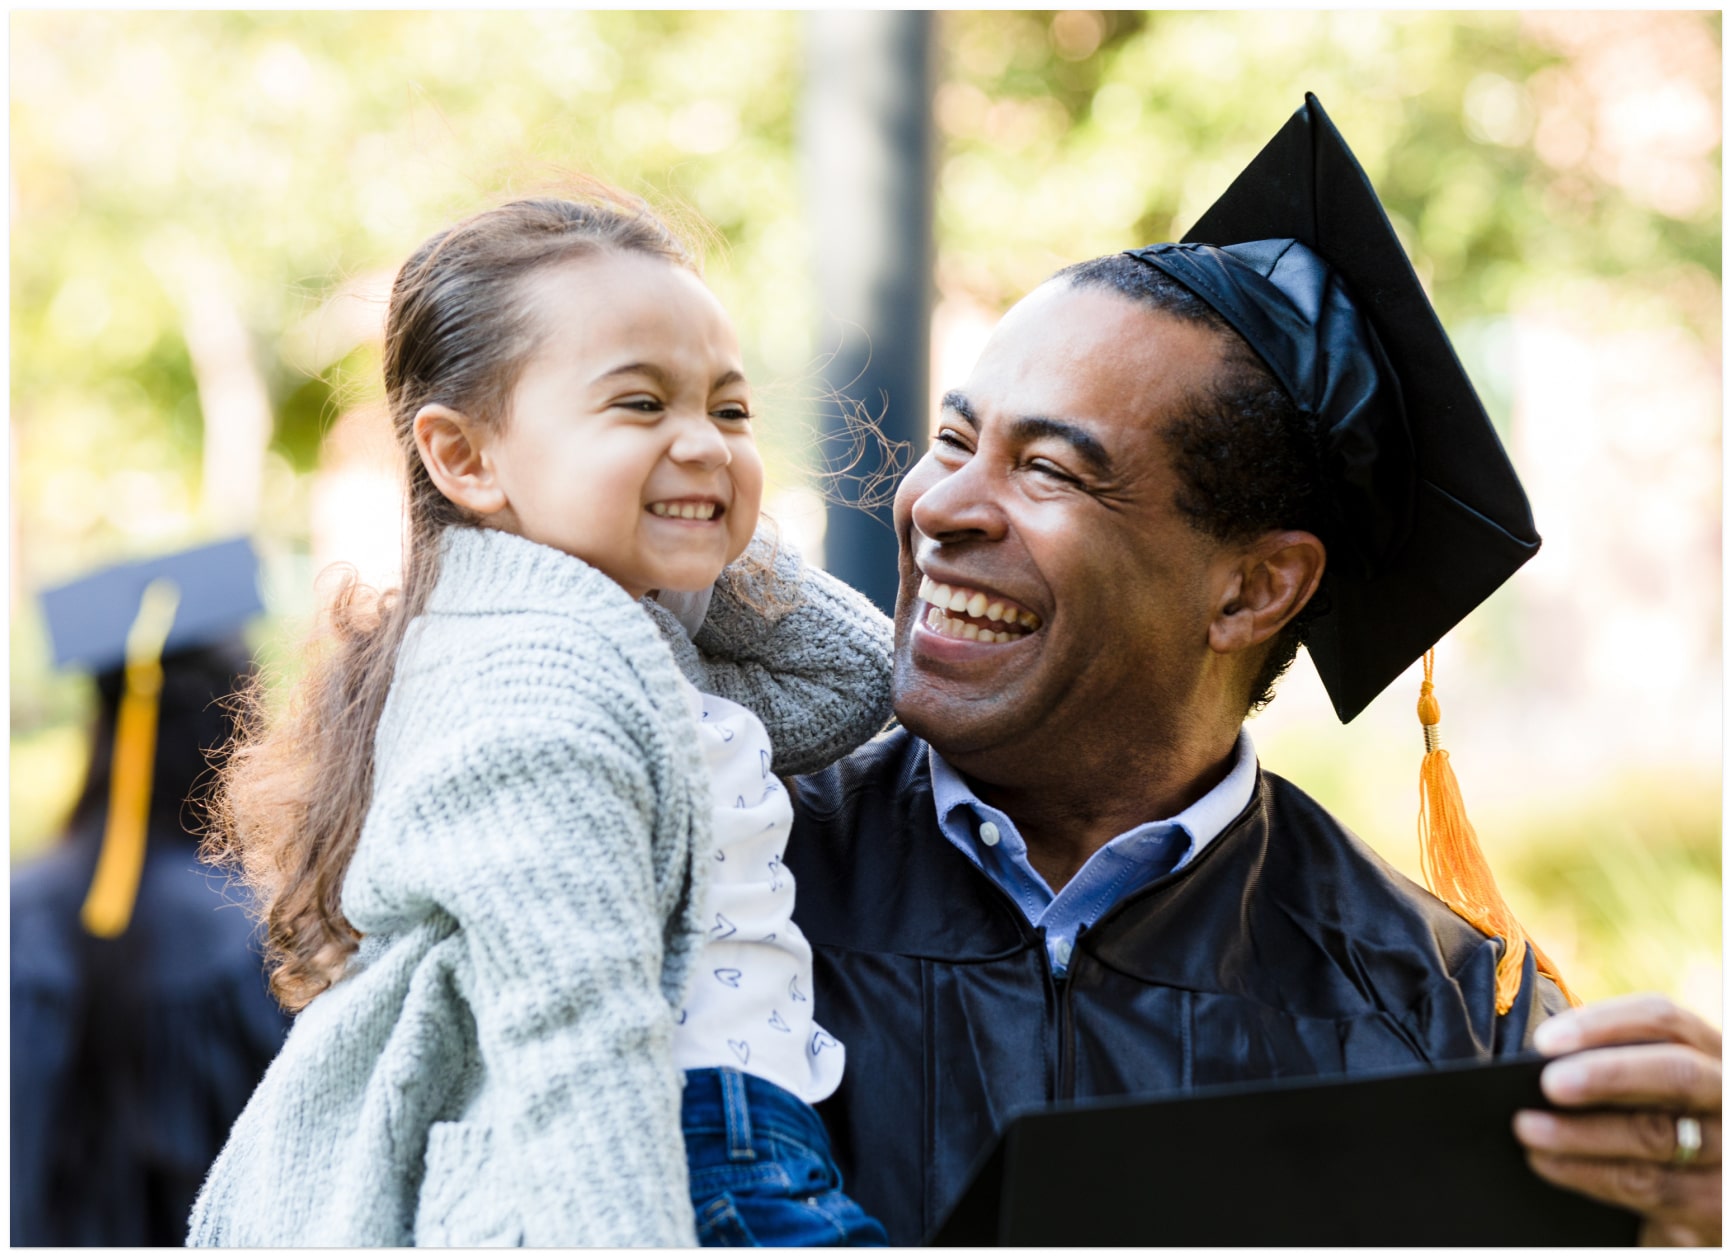 Happy caregiver in graduation robe holds smiling child